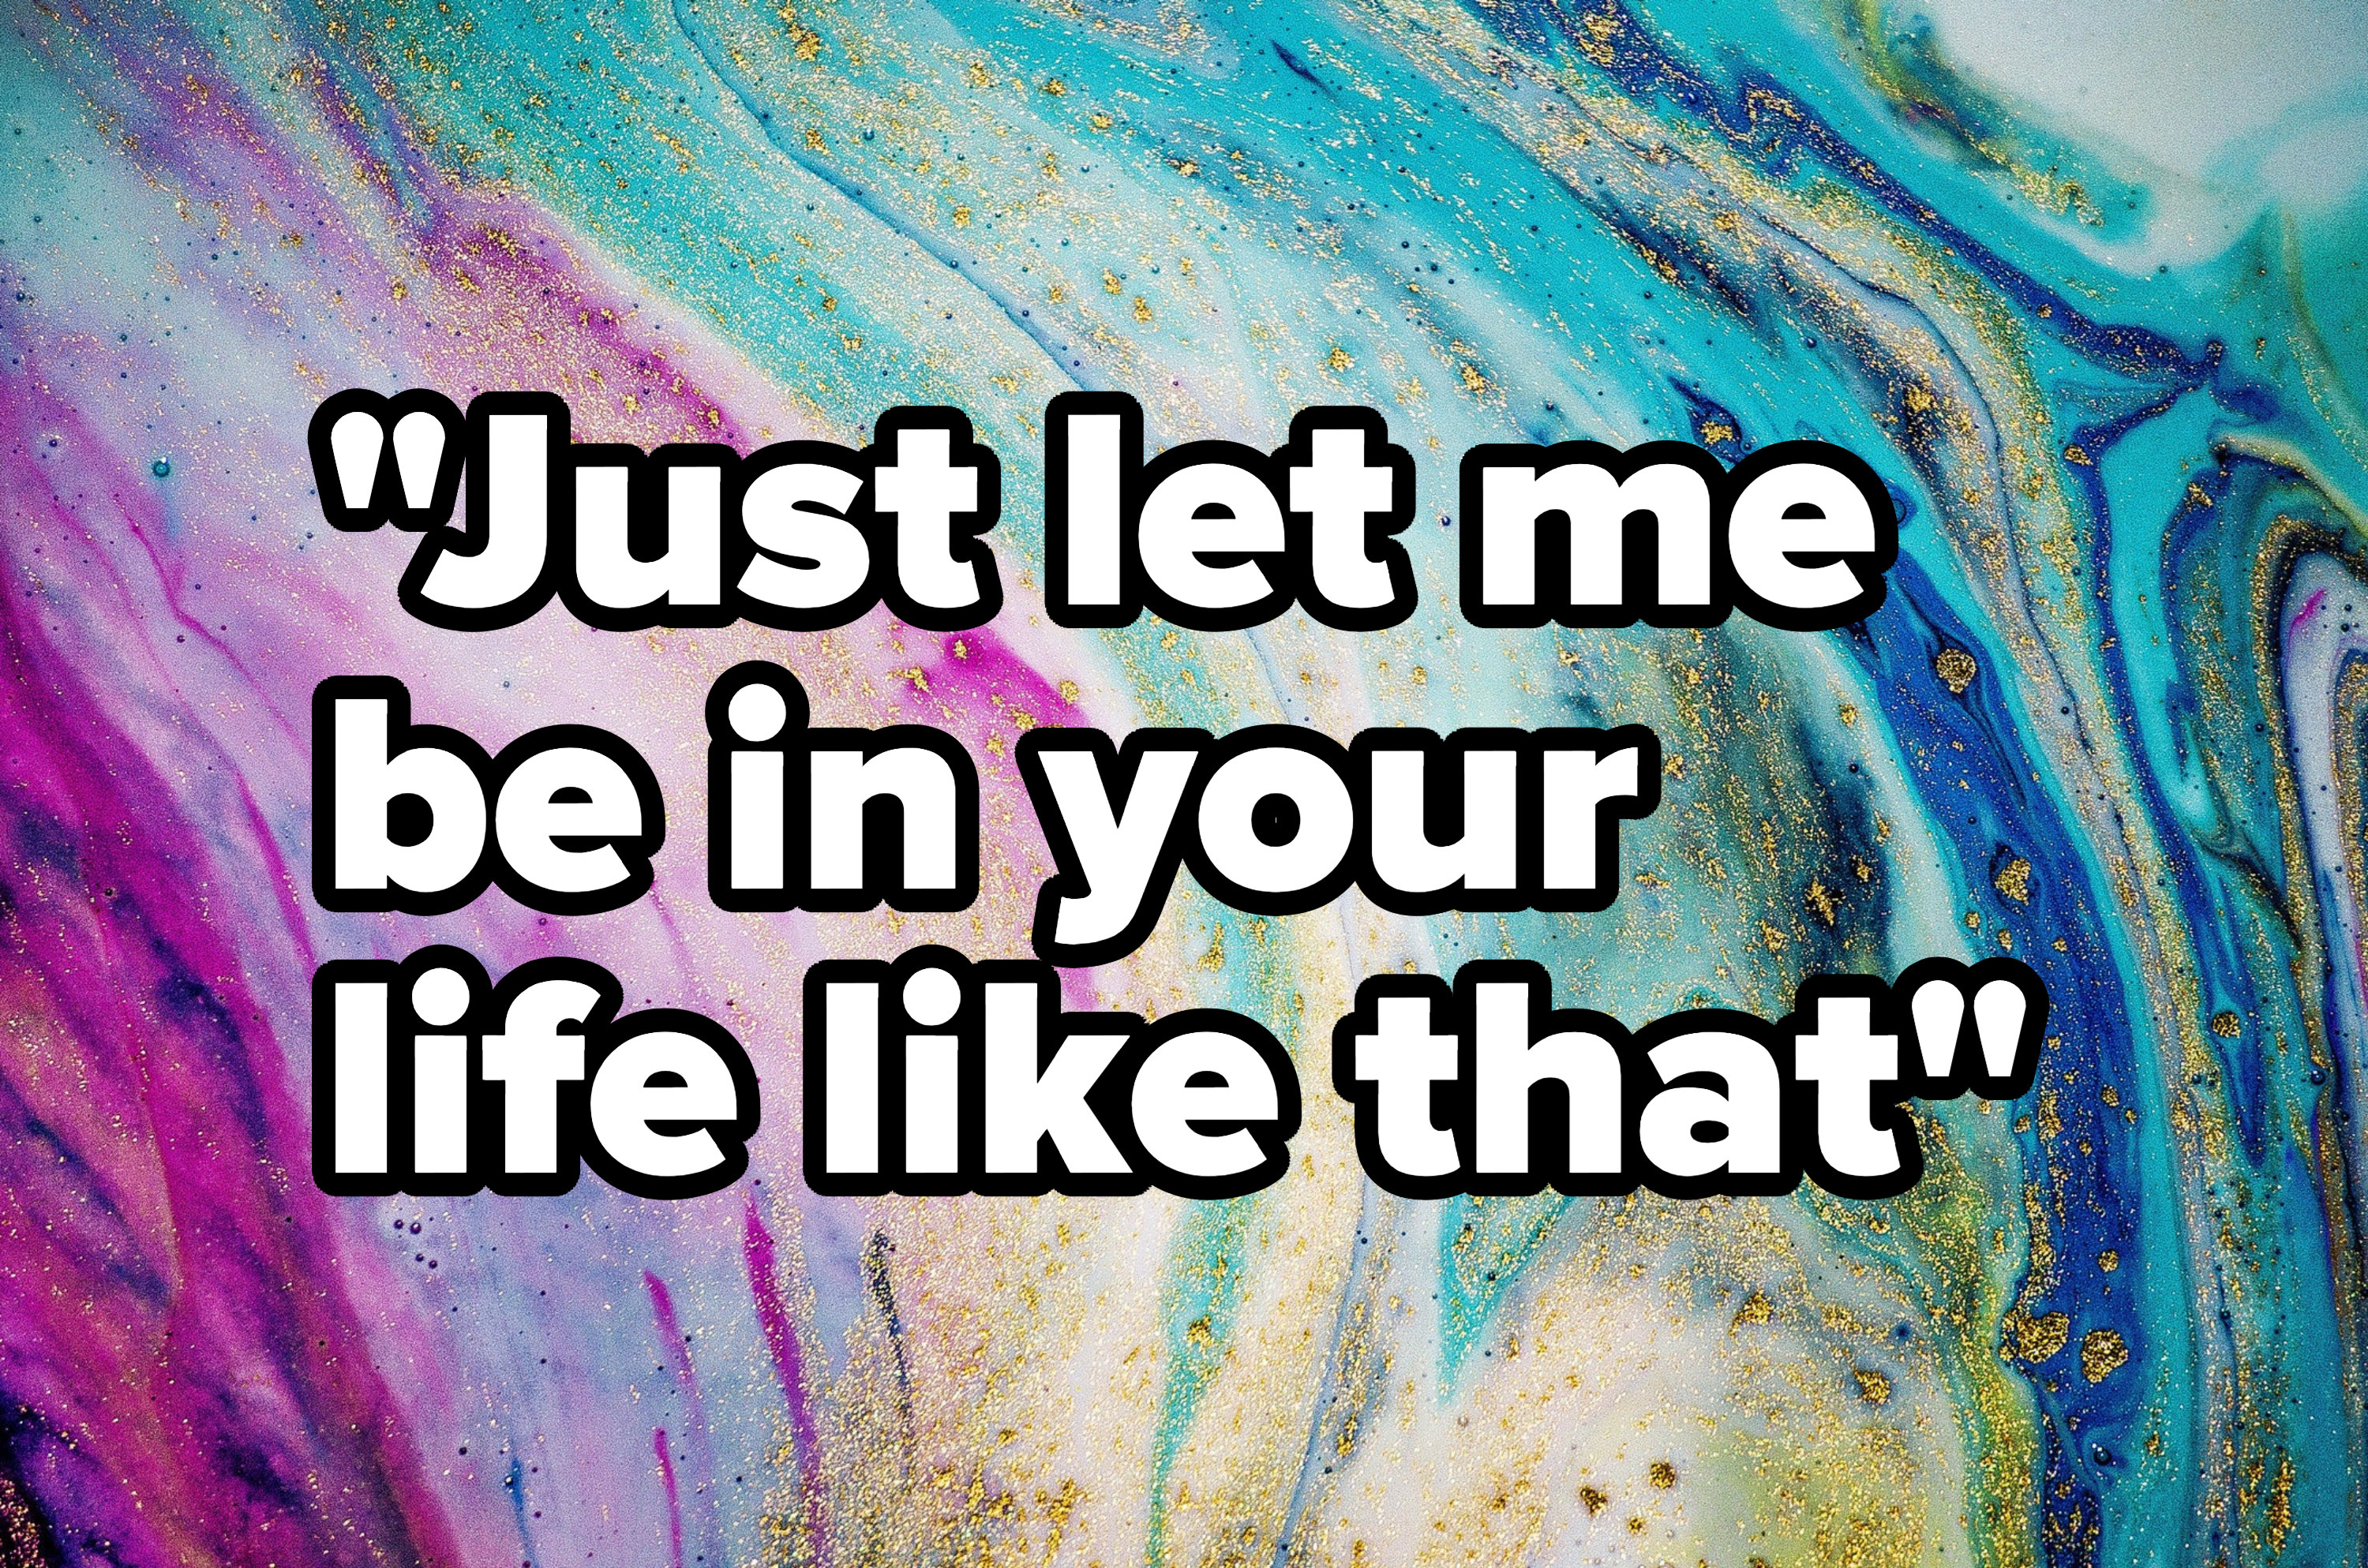 &quot;Just let me be in your life like that&quot; written over a marble design